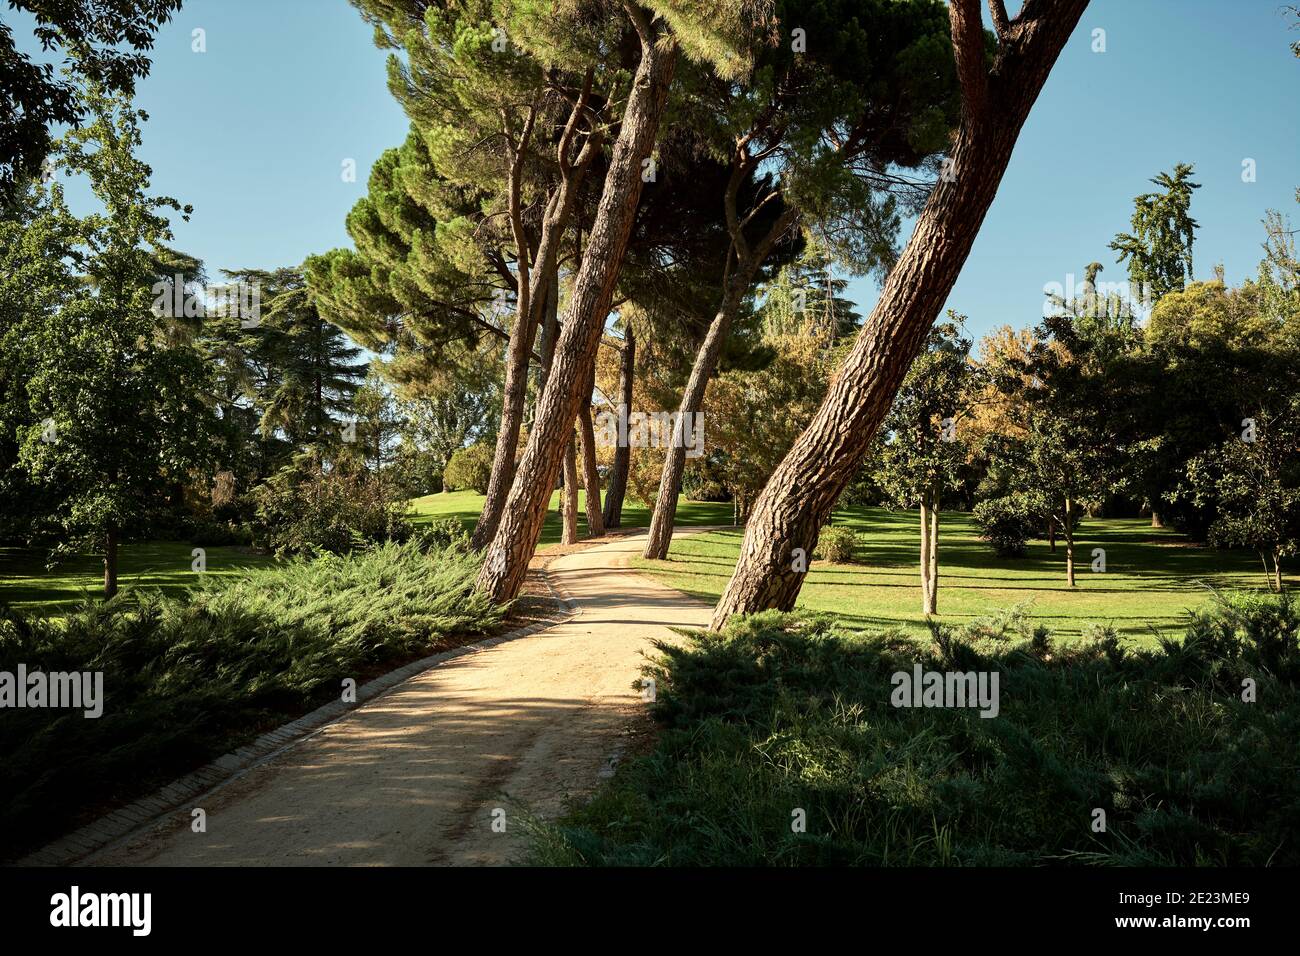 Picturesque scenery of narrow empty pathway going amidst tall stone pines growing in park under cloudless blue sky in Madrid Stock Photo